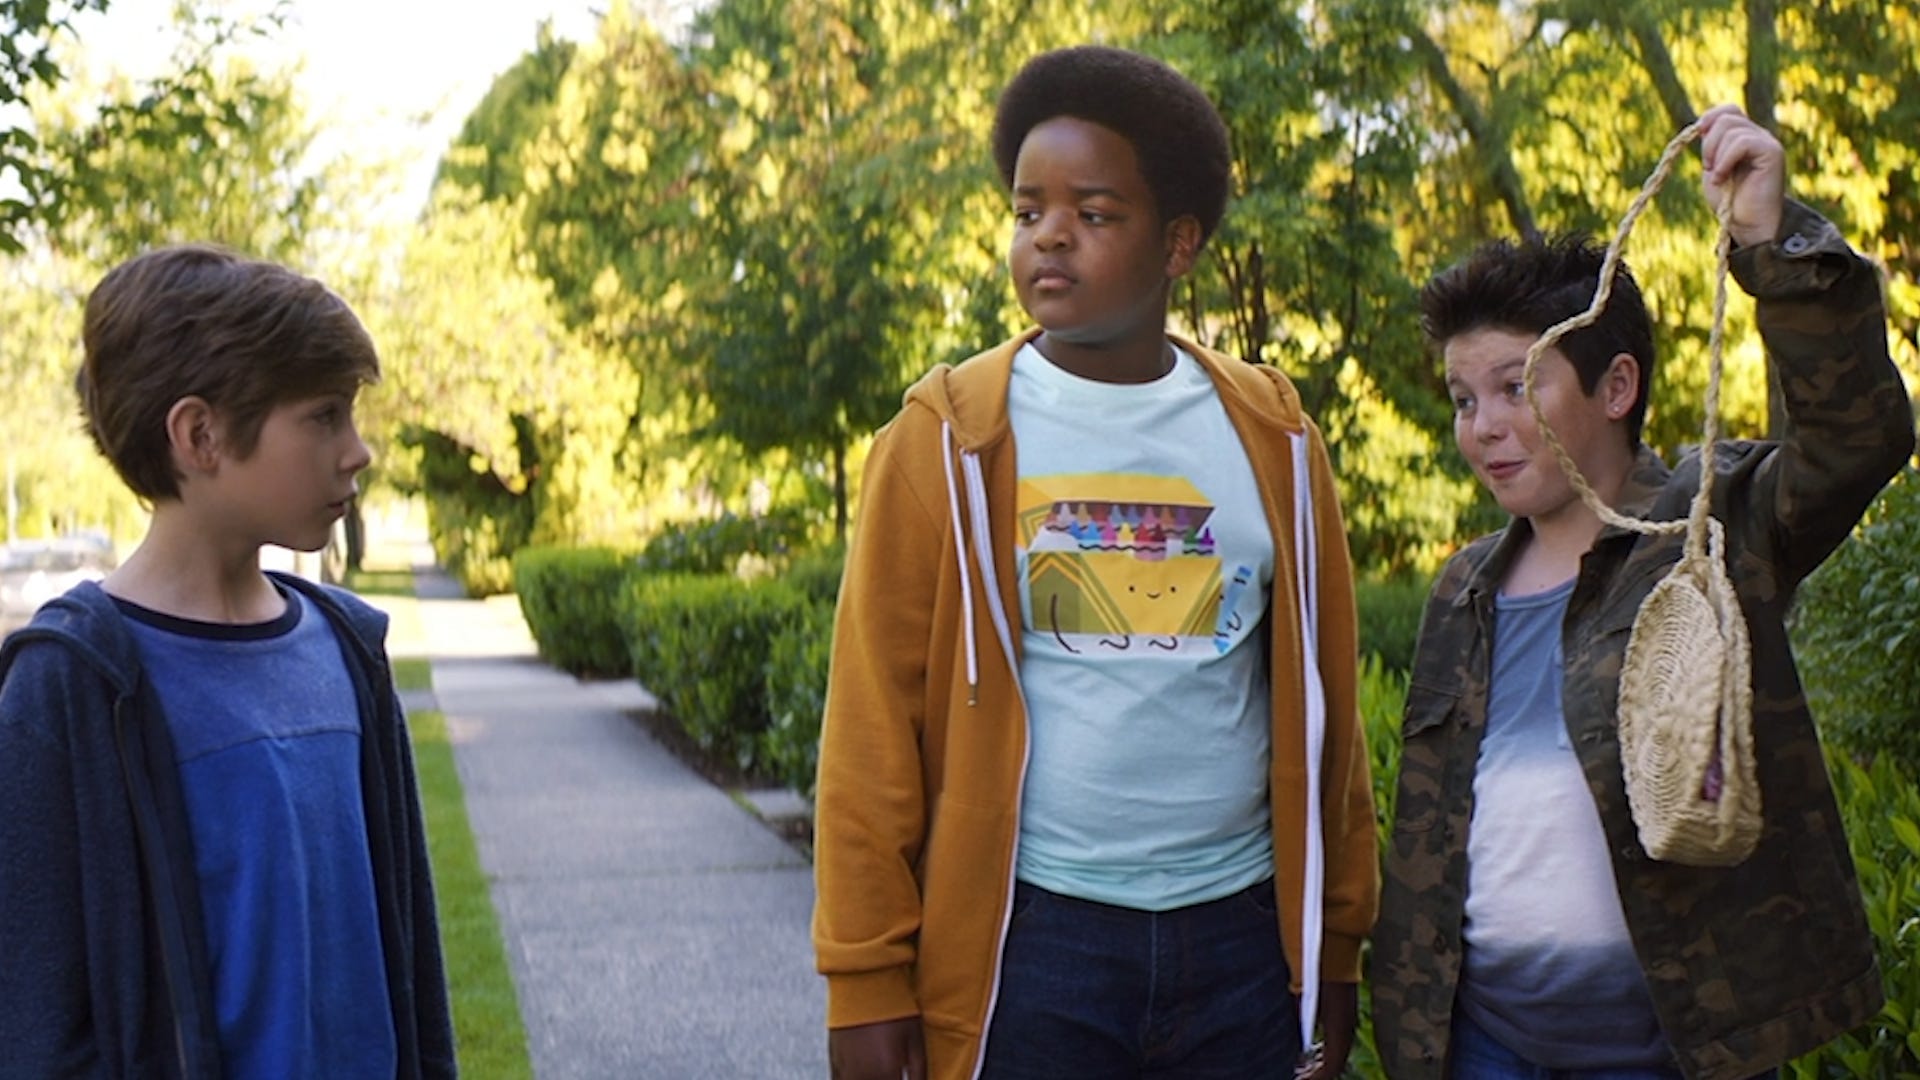 6th Grade Girls Sex - Three boys know how to get into trouble in 'Good Boys' trailer